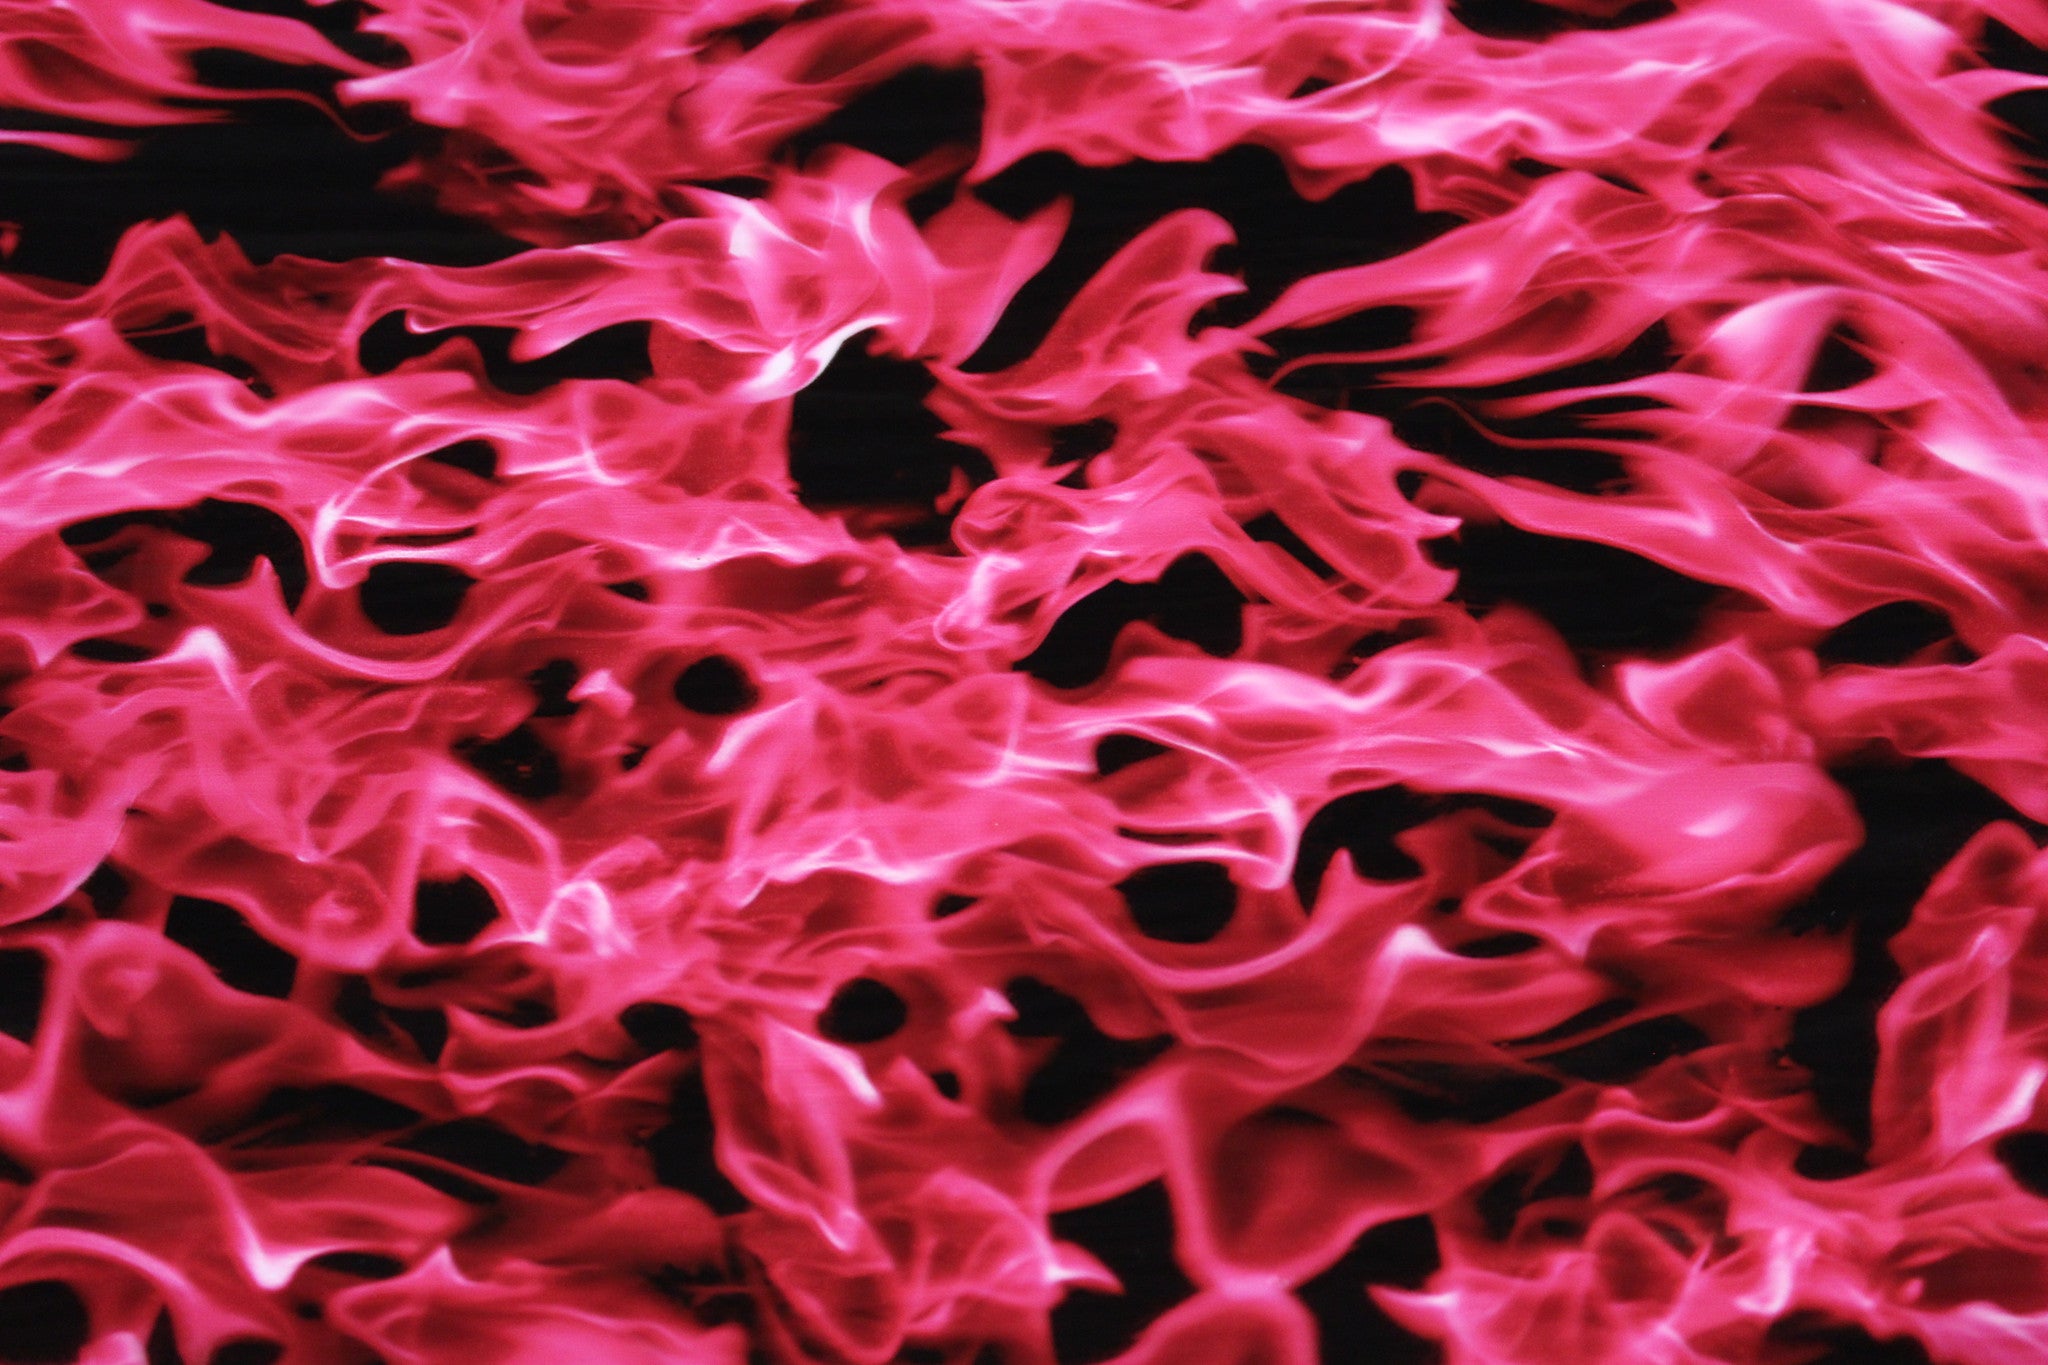 pink flames background